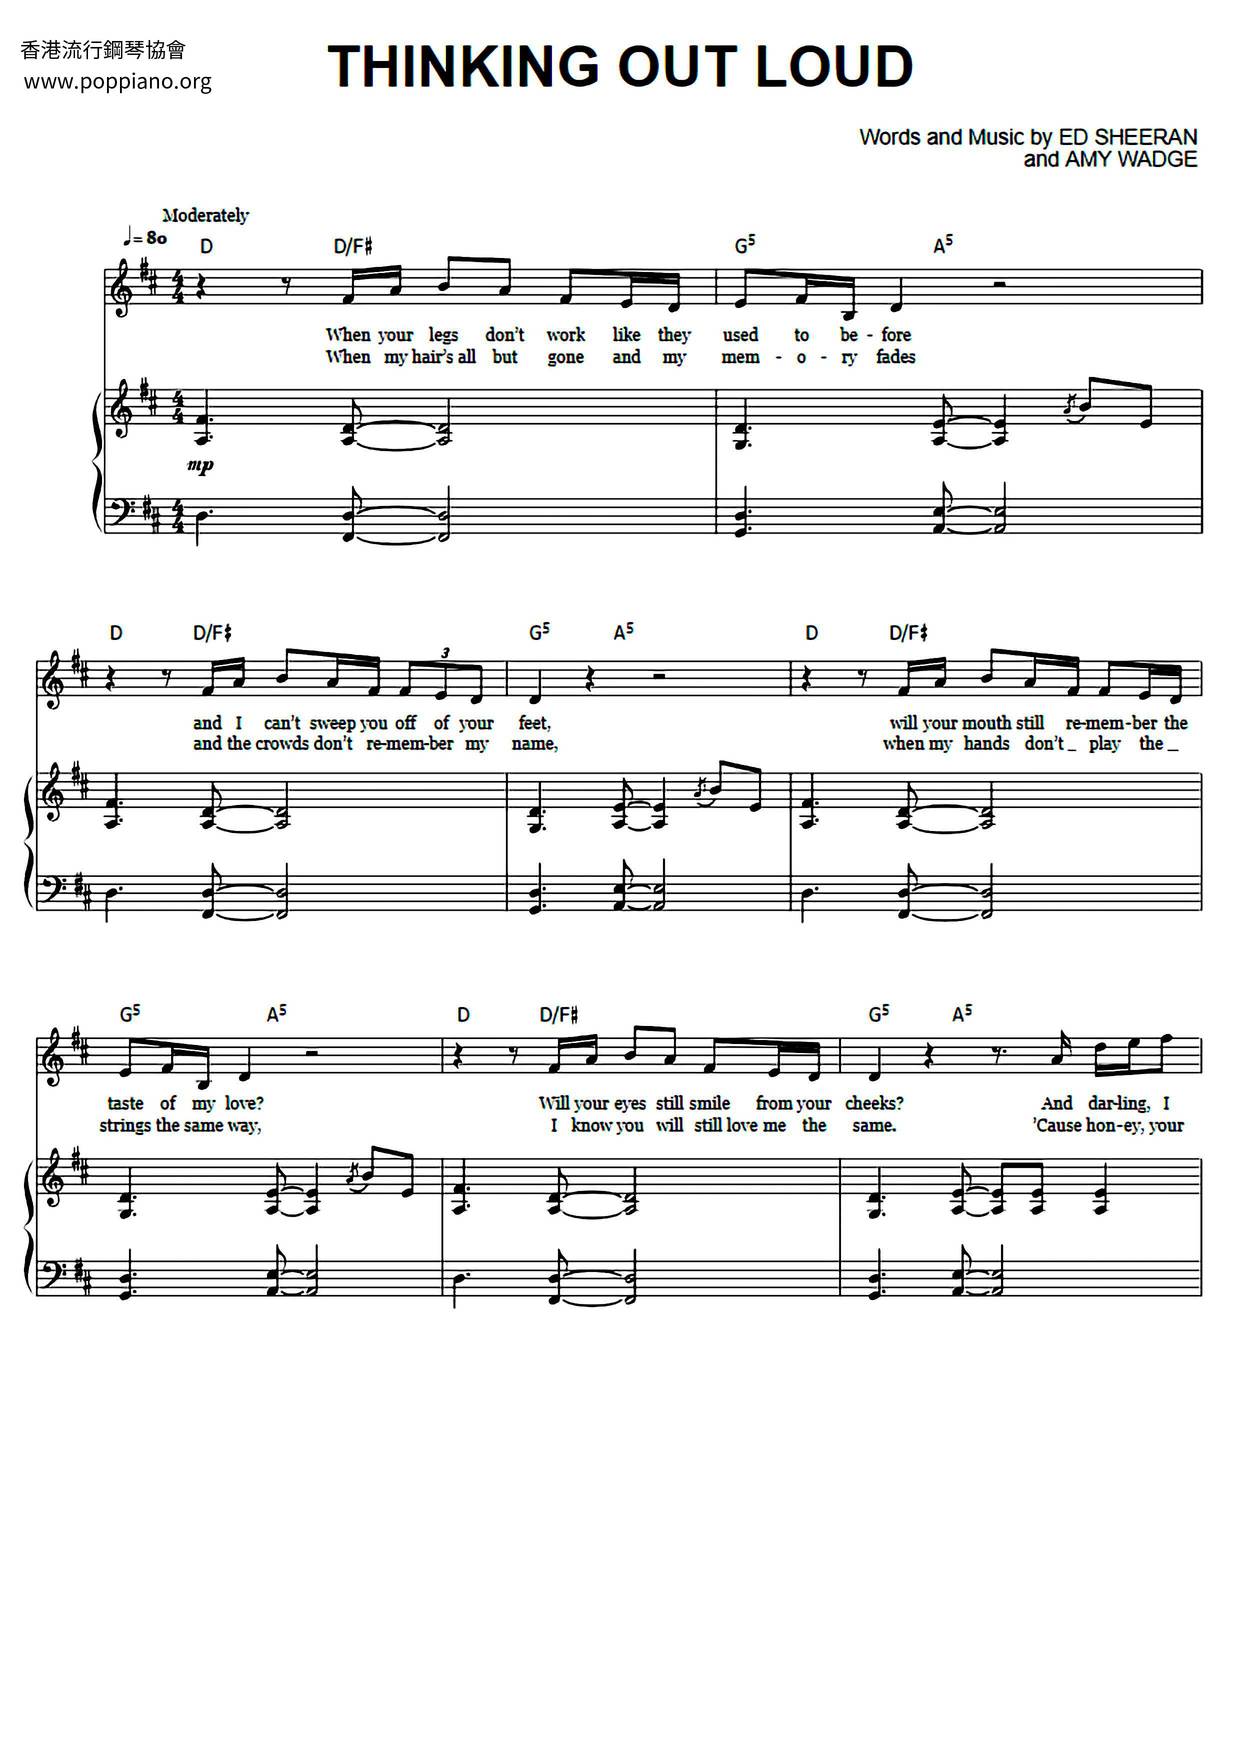 Thinking Out Loud Score